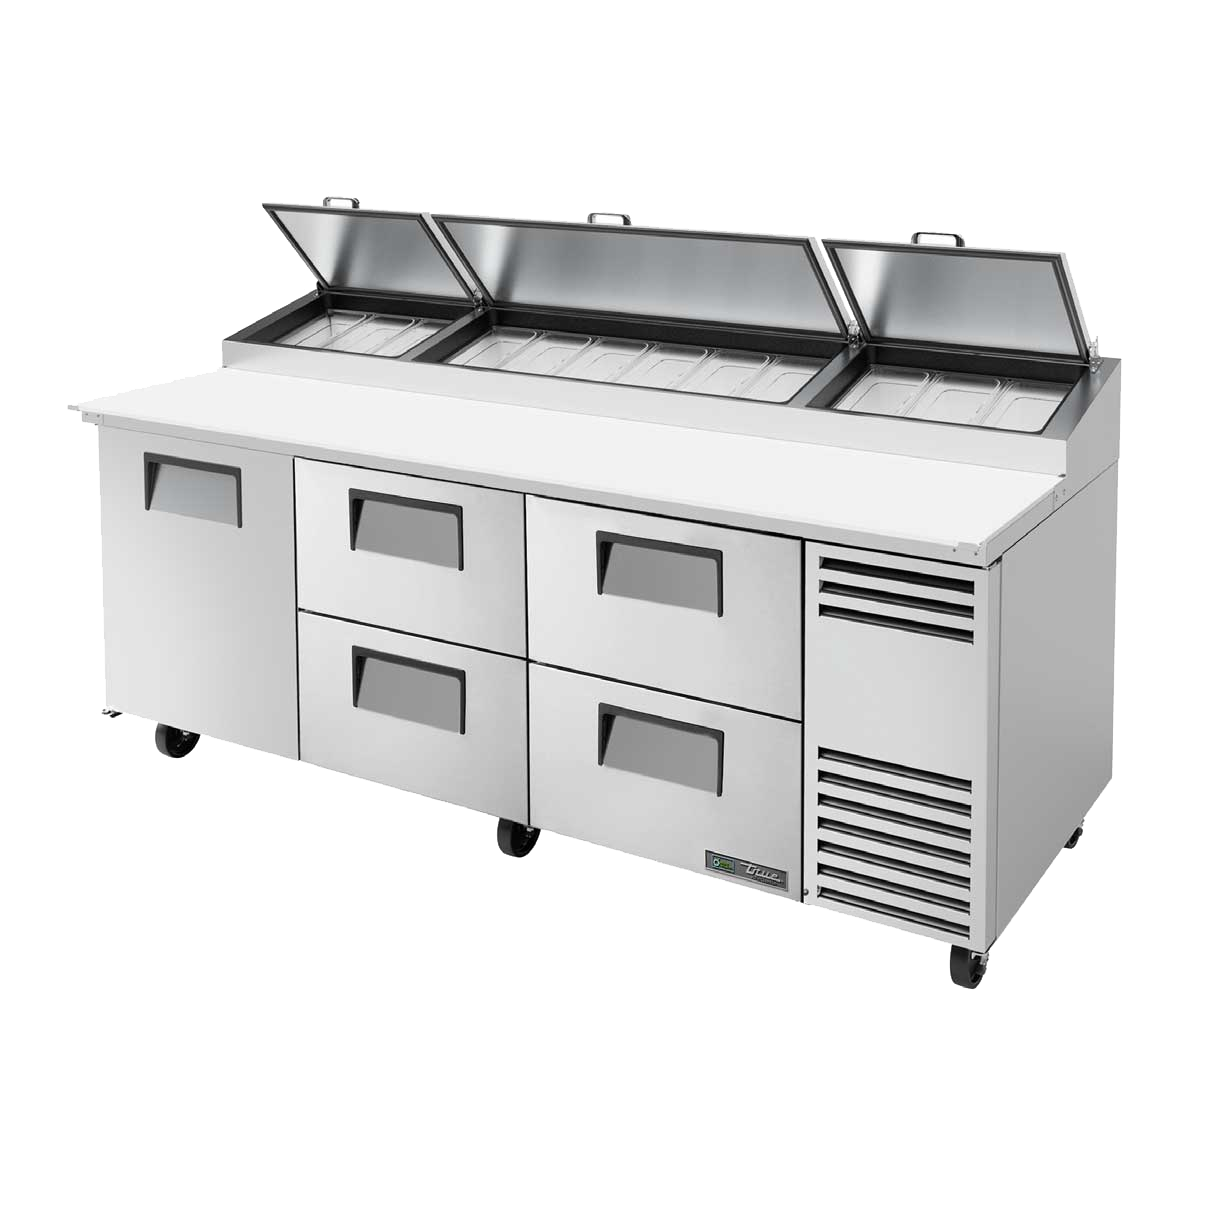 superior-equipment-supply - True Food Service Equipment - True Stainless Steel Three Section Four Drawer 93"W Pizza Prep Table